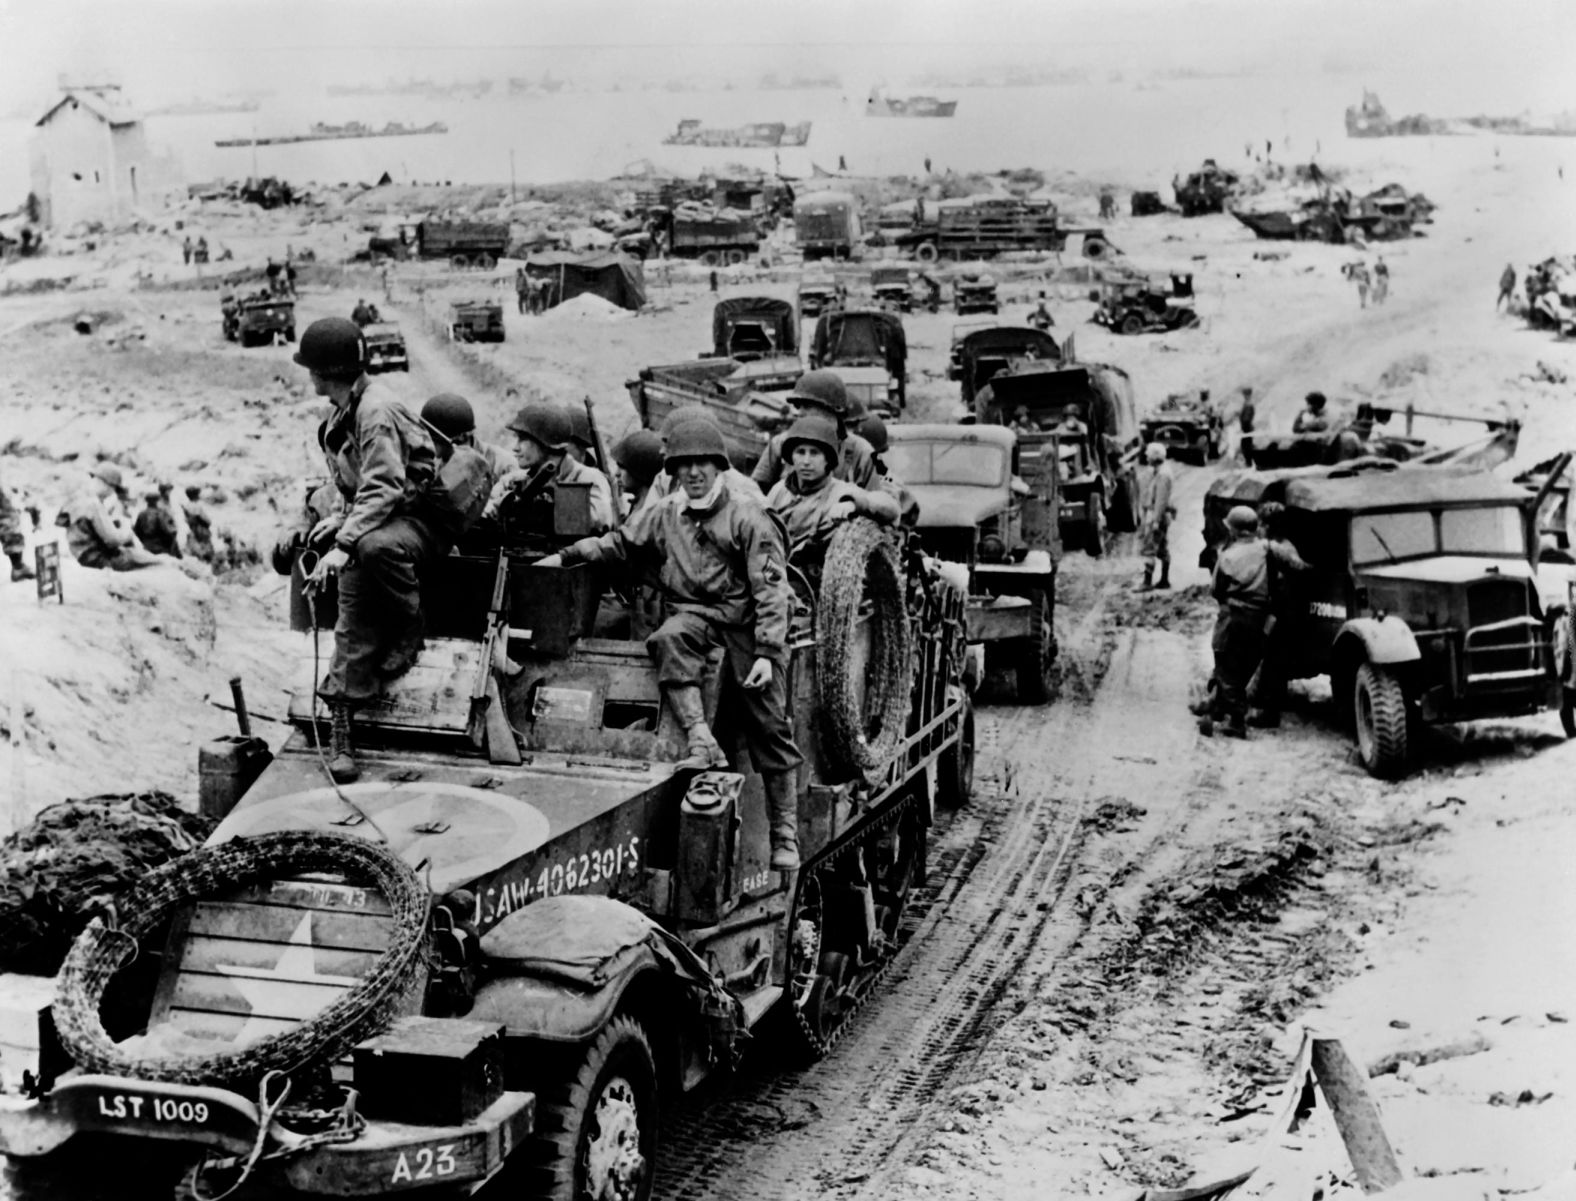 French soldiers are transported on the Normandy beaches. Most troops on D-Day were American, British and Canadian, according to the Imperial War Museums, but troops also came from Australia, Belgium, the Czech Republic, France, Greece, the Netherlands, New Zealand, Norway, Rhodesia (now Zimbabwe) and Poland.